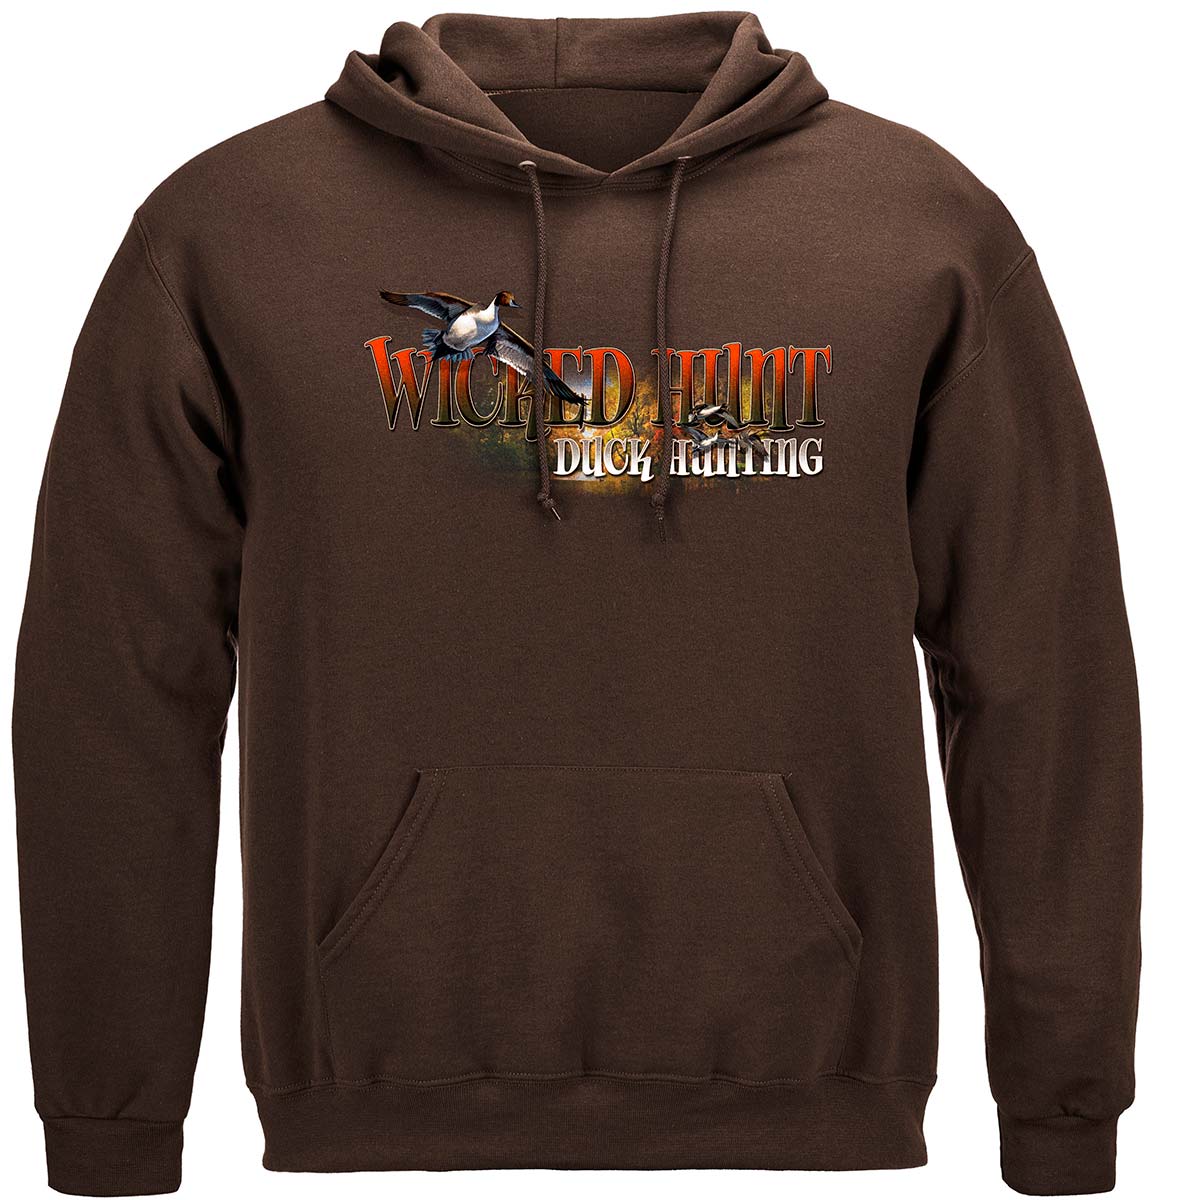 Duck Hunting In A Fowl Mood Premium Hooded Sweat Shirt